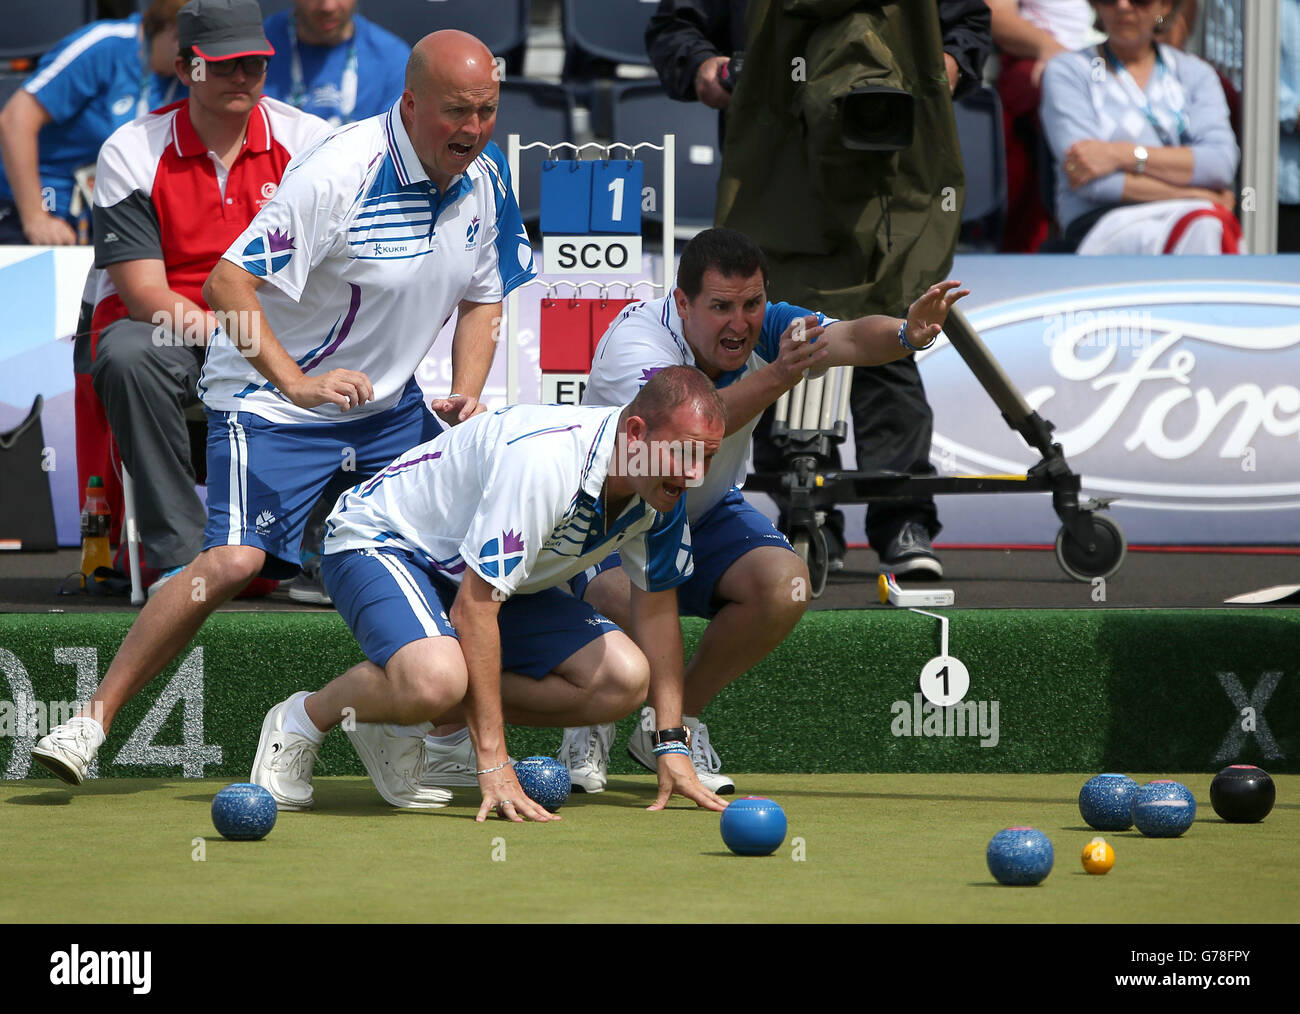 Scotland's Paul Foster, Neil Speirs and David Peacock shout at a bowl against England in the Men's Fours final at Kelvingrove Lawn Bowls Centre, during the 2014 Commonwealth Games in Glasgow. Stock Photo